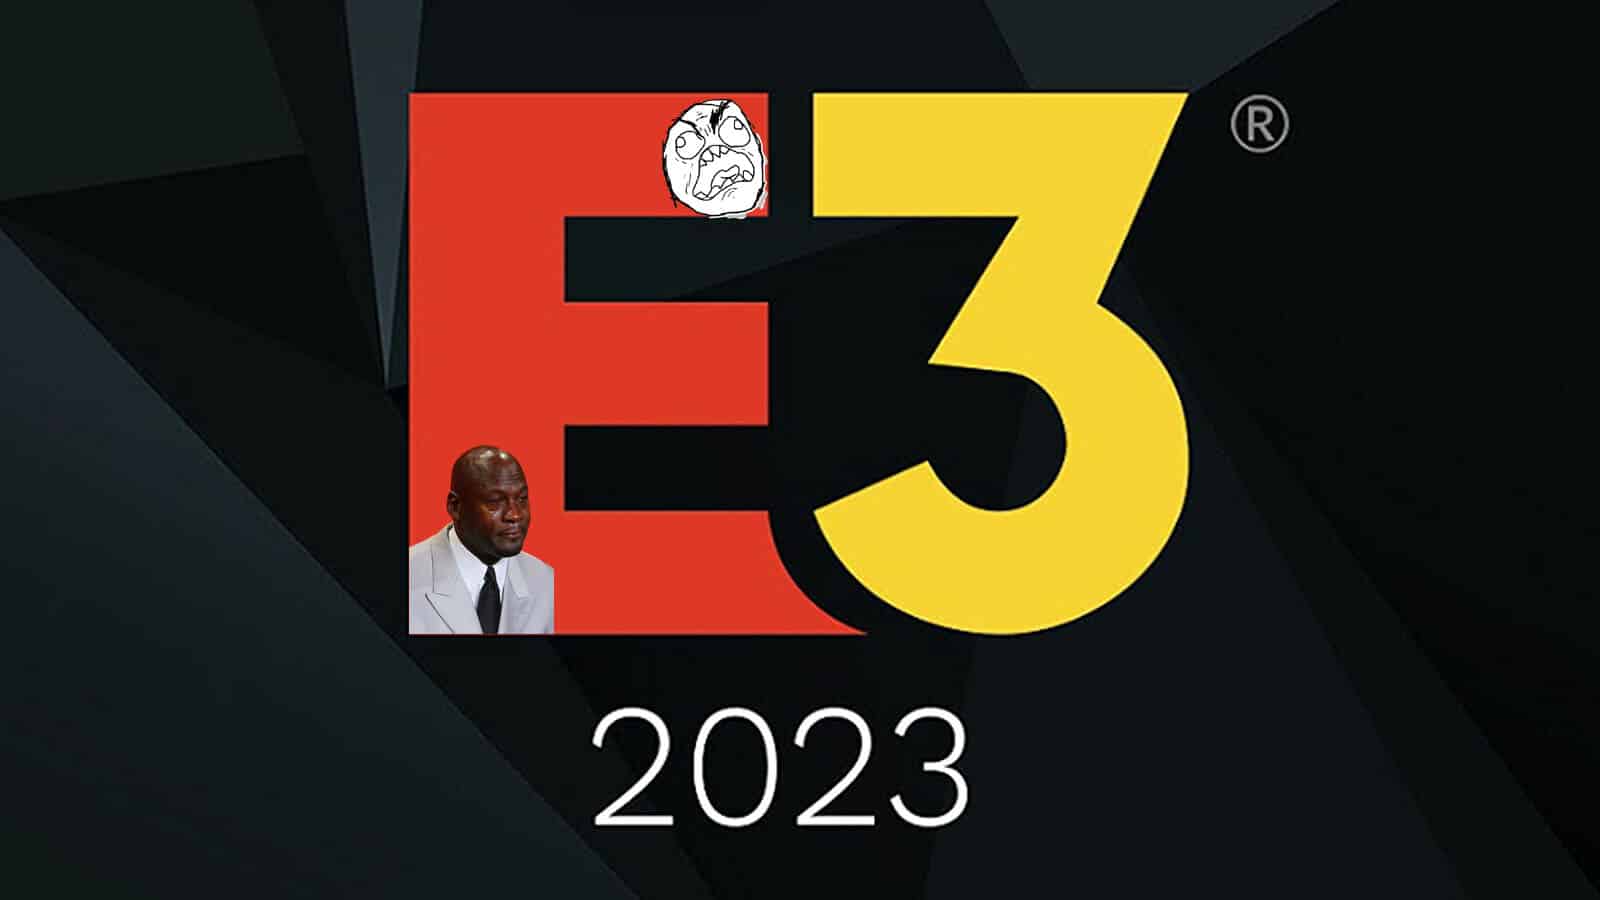 E3 2023 is officially canceled